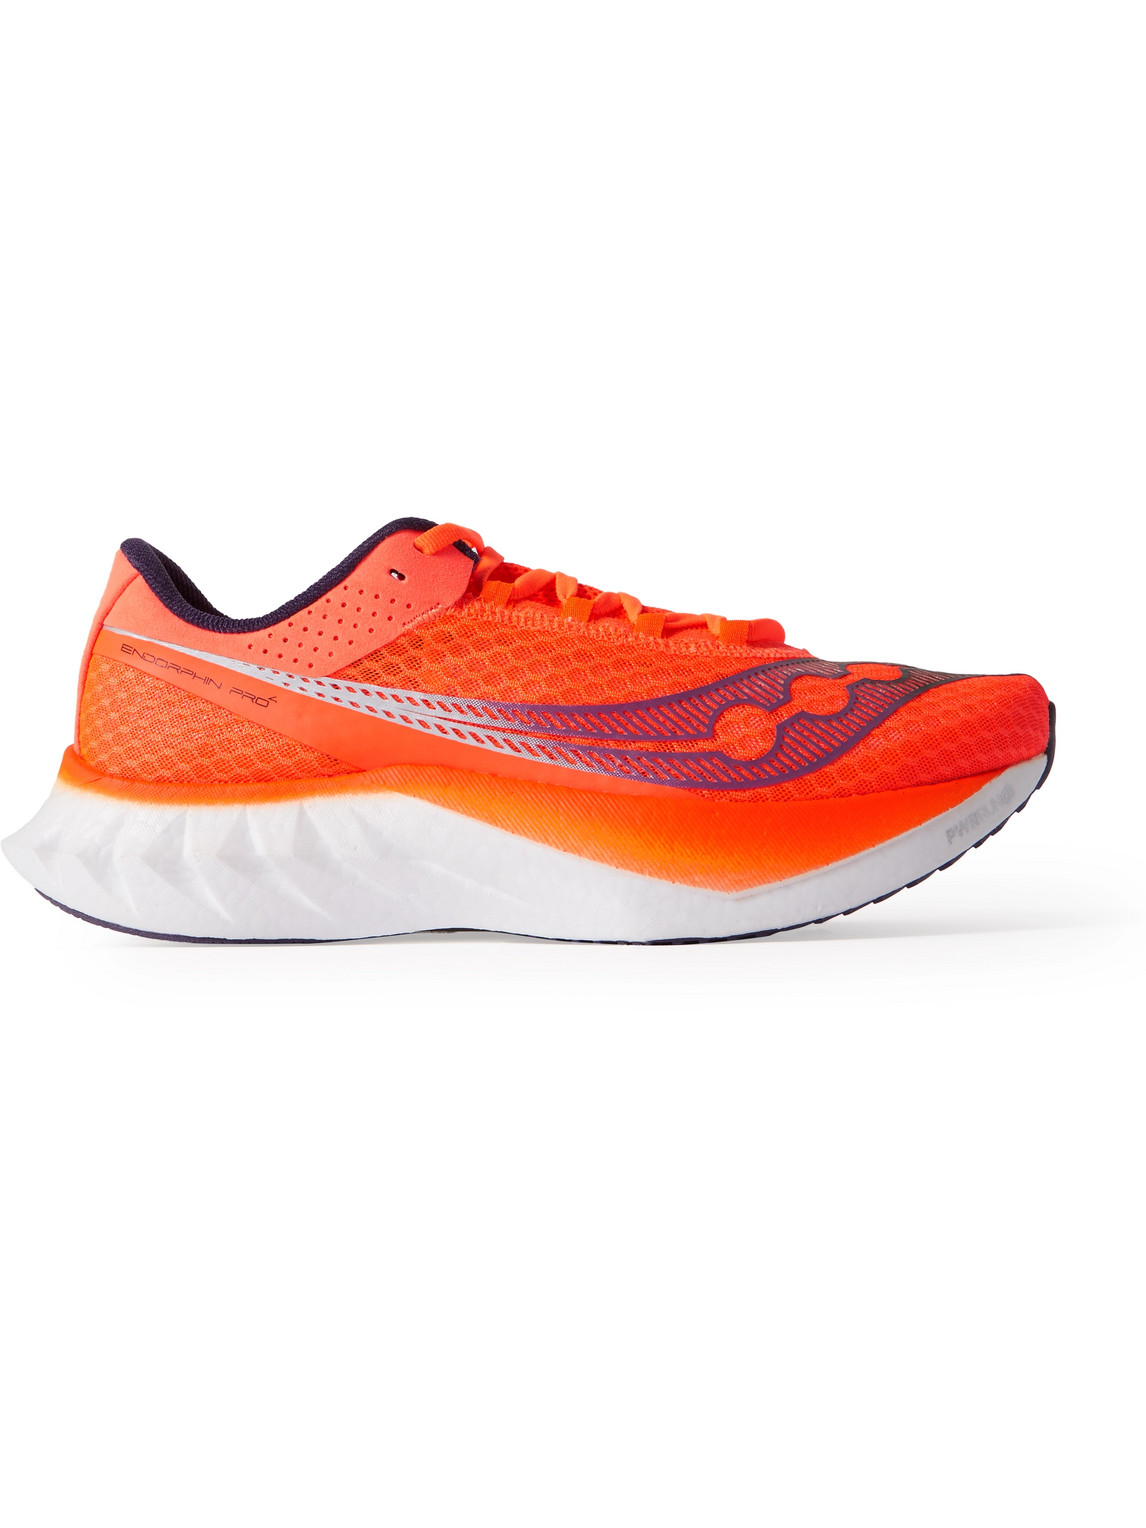 Endorphin Pro 4 Rubber-Trimmed Mesh Running Sneakers